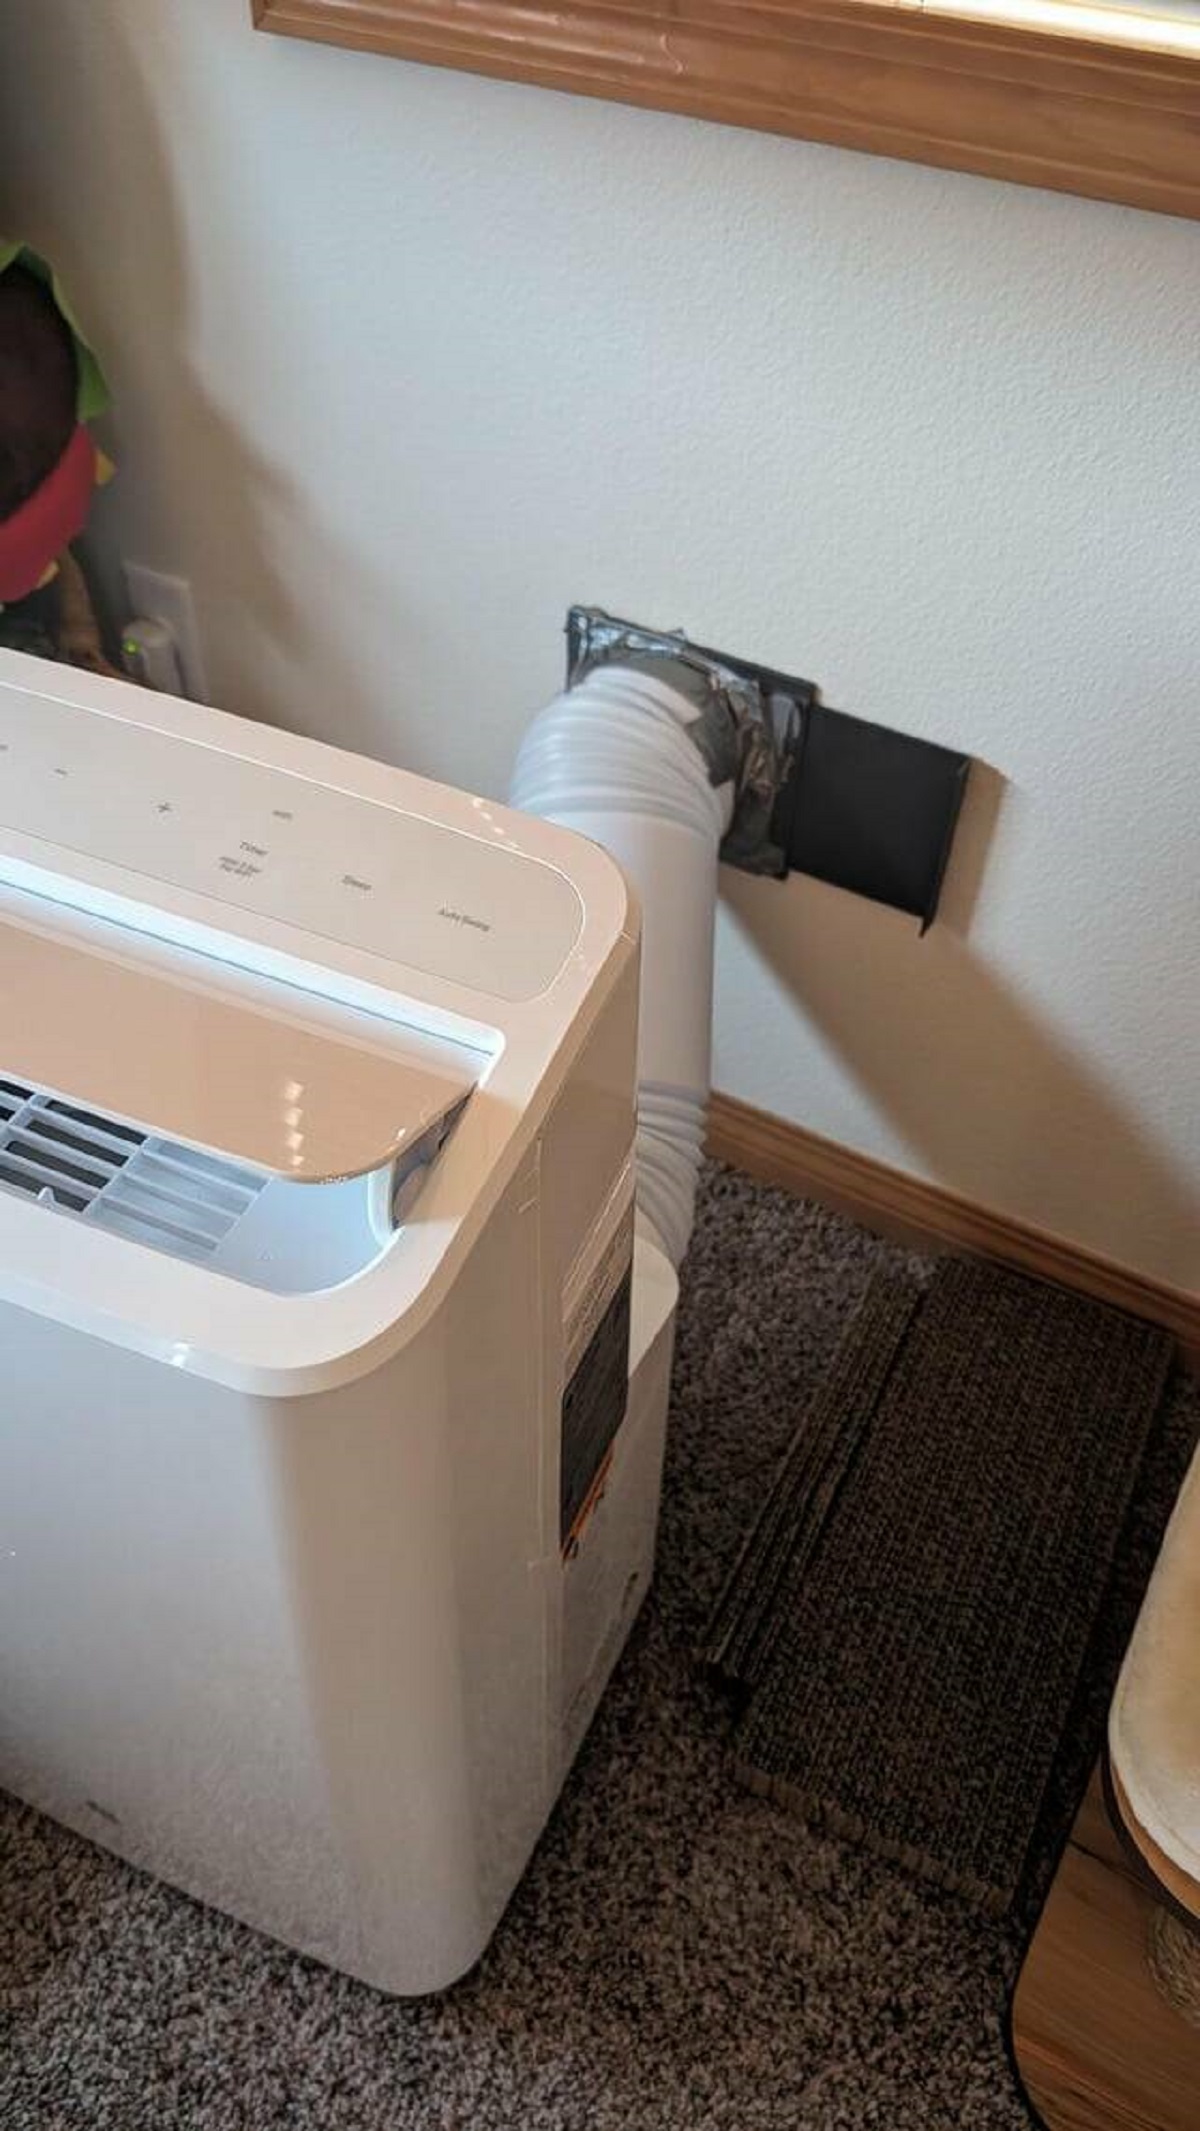 "Apartment came with portable AC exhaust ports"